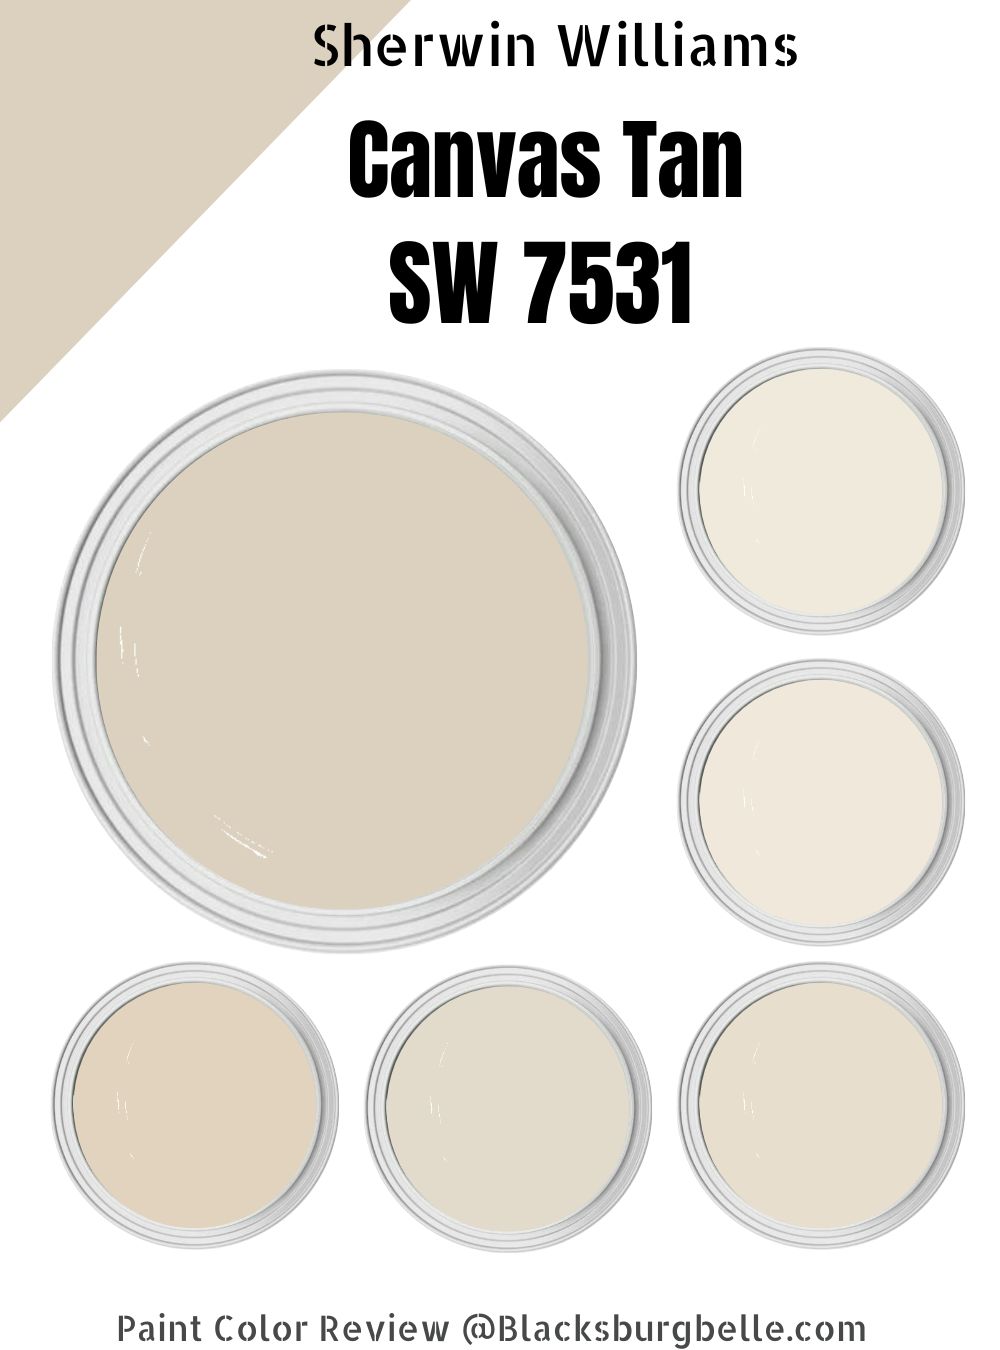 Sherwin-Williams Canvas Tan (Palette, Coordinating & Inspirations)